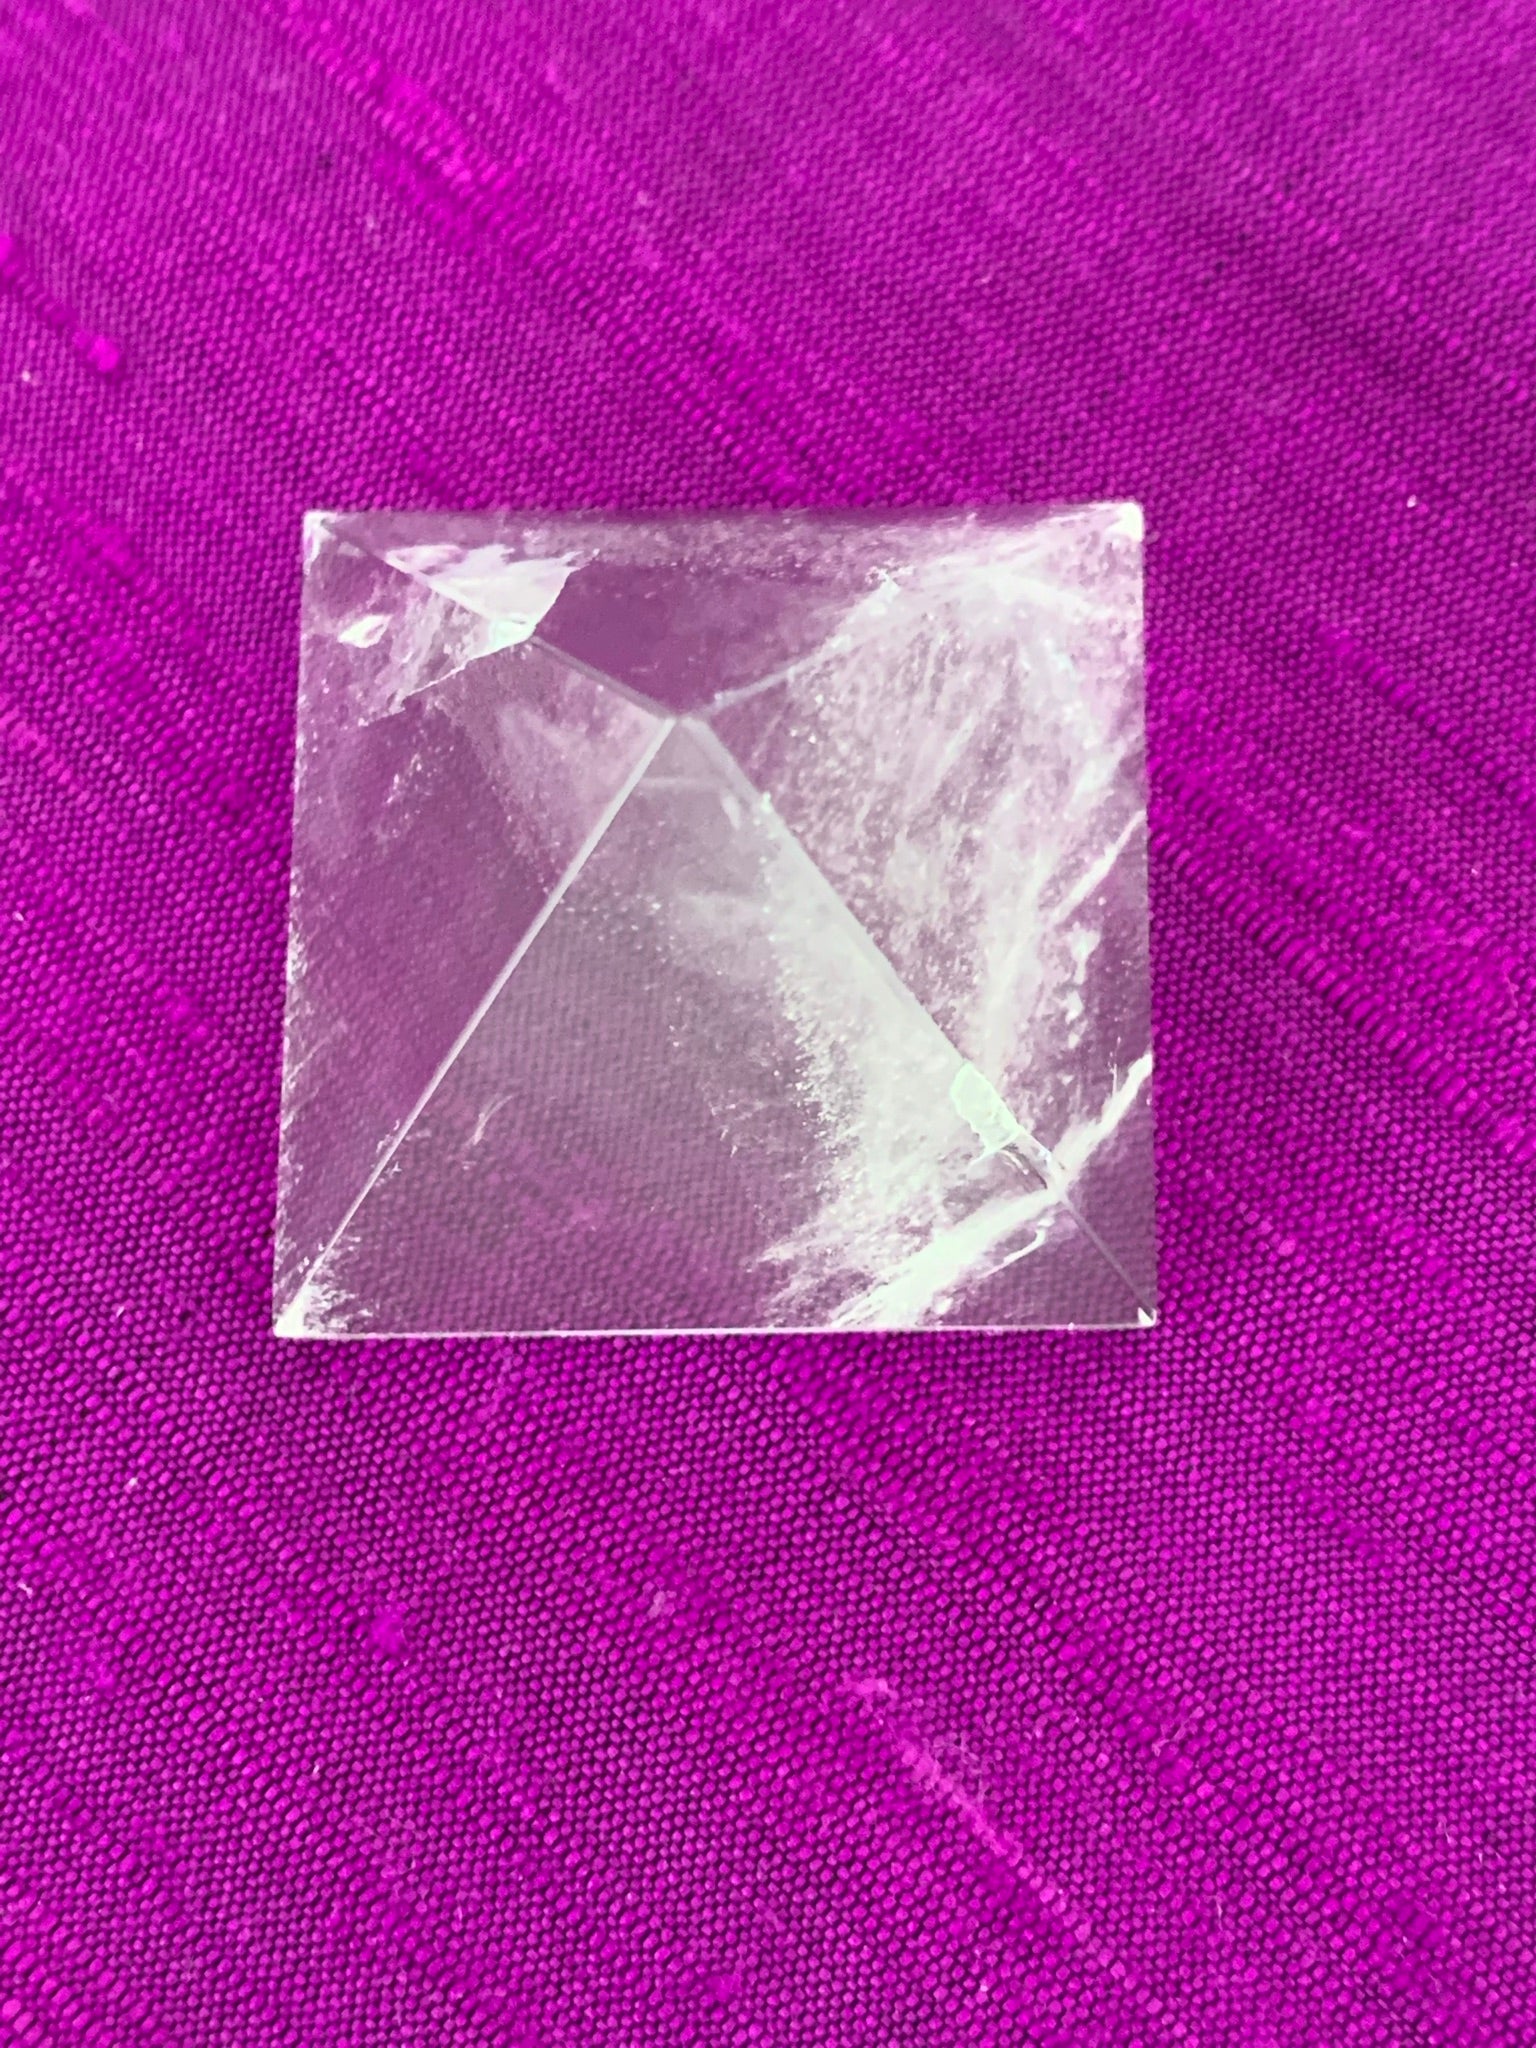 Close-up view from above. Powerful clear quartz pyramid is perfect for your altar, meditation space or anywhere in your home or office. This pyramid is cloudy or milky in appearance - more translucent than the other clear quartz pyramids. So, the clear vs the cloudy - it's all in the eye of the beholder ;). Quartz is the "most powerful healing and energy amplifier on the planet" (Judy Hall).  Pyramids are used to amplify and transform energy. Approximately 1"x1".